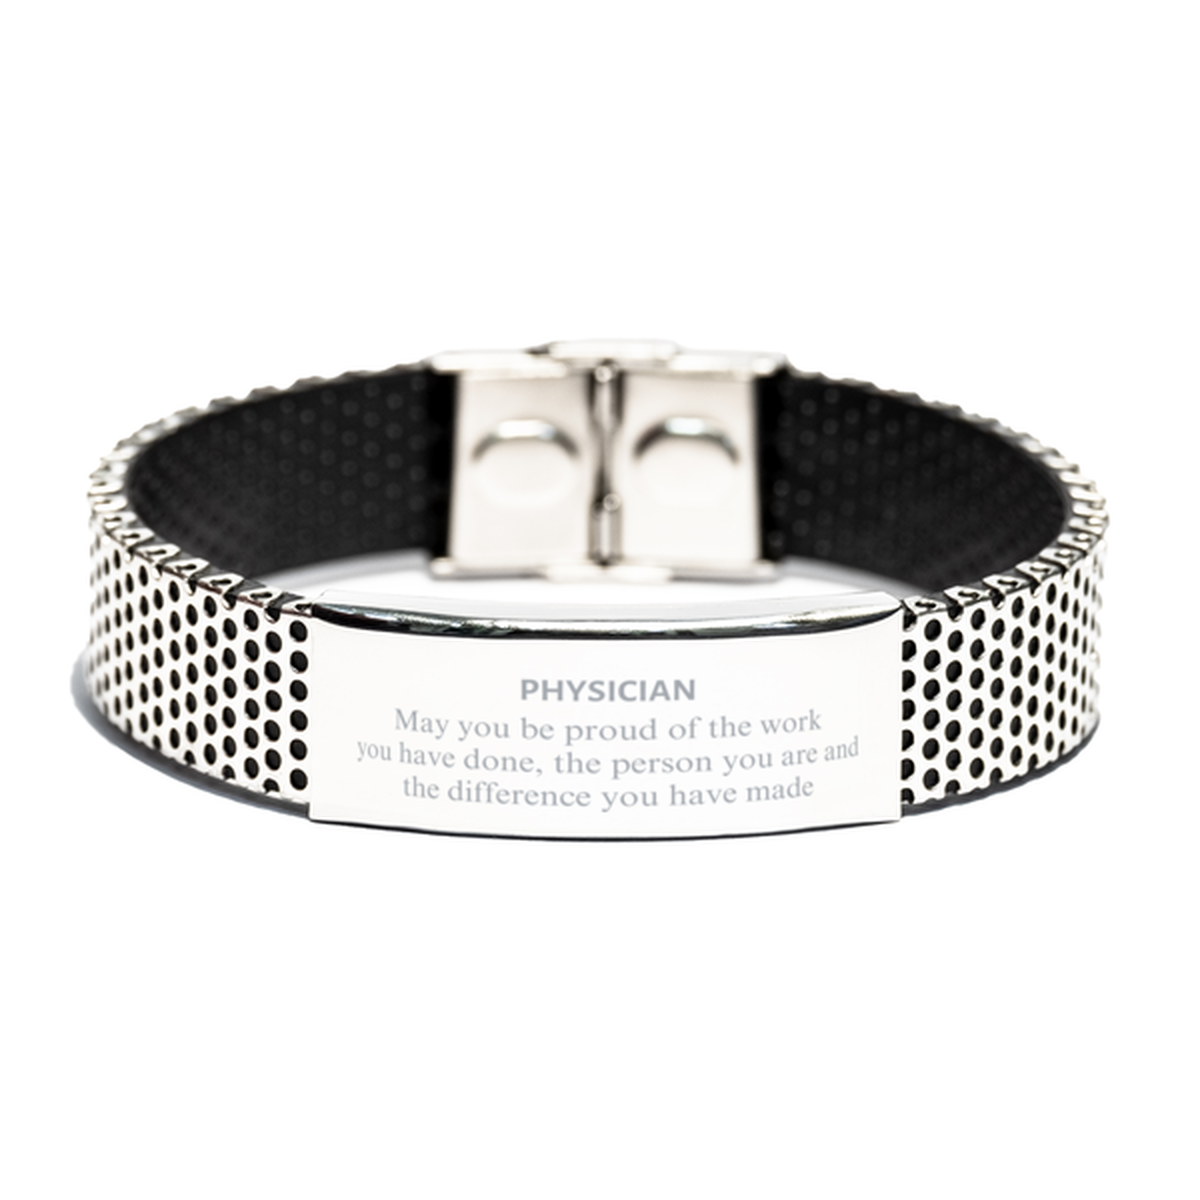 Physician May you be proud of the work you have done, Retirement Physician Stainless Steel Bracelet for Colleague Appreciation Gifts Amazing for Physician